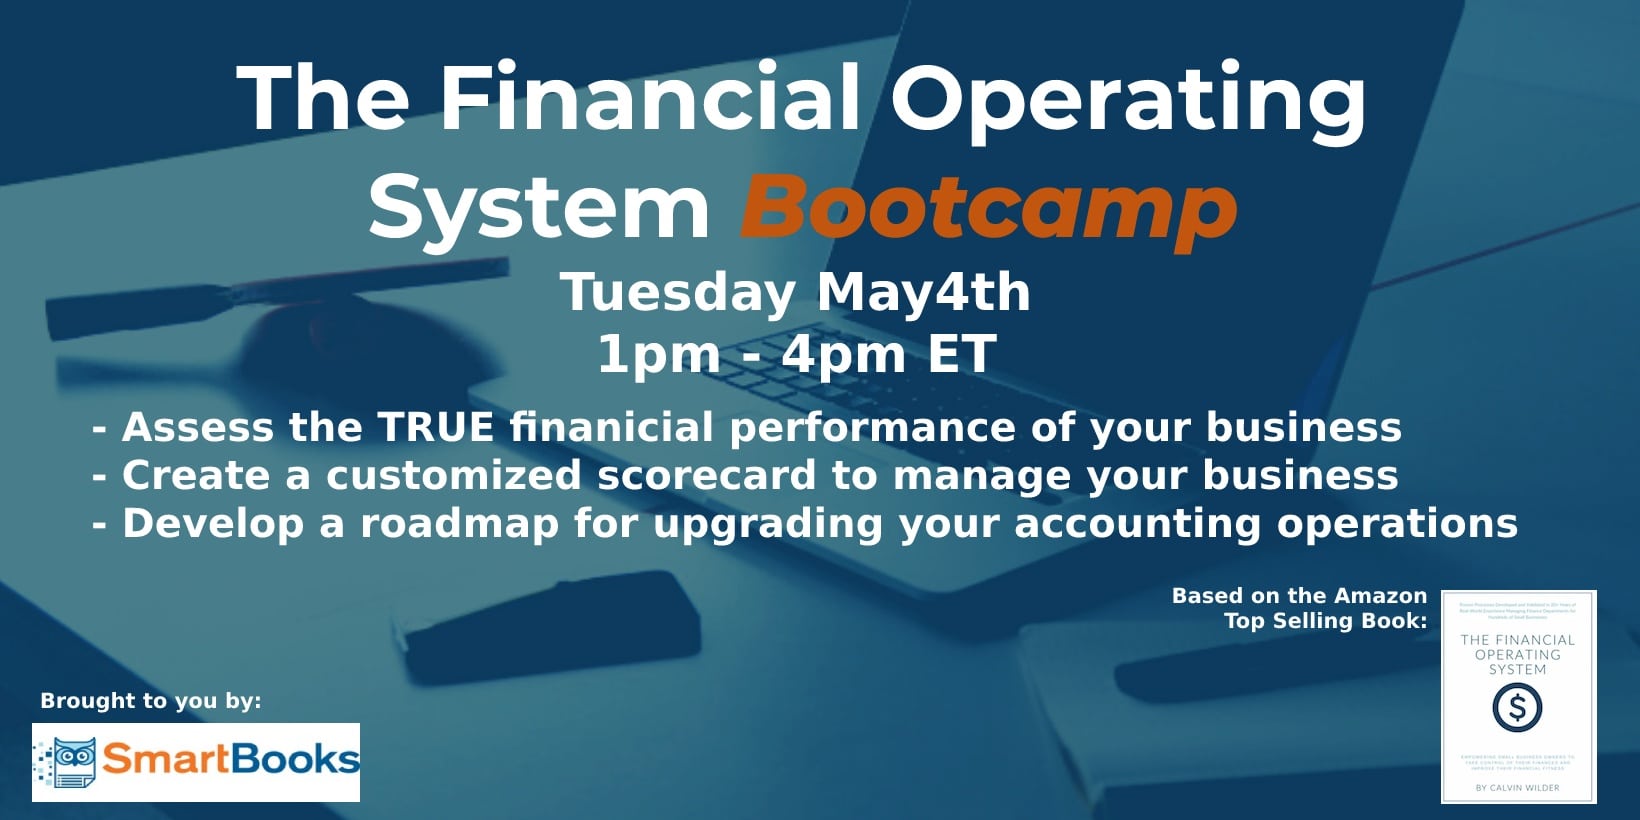 The Financial Operating System Bootcamp